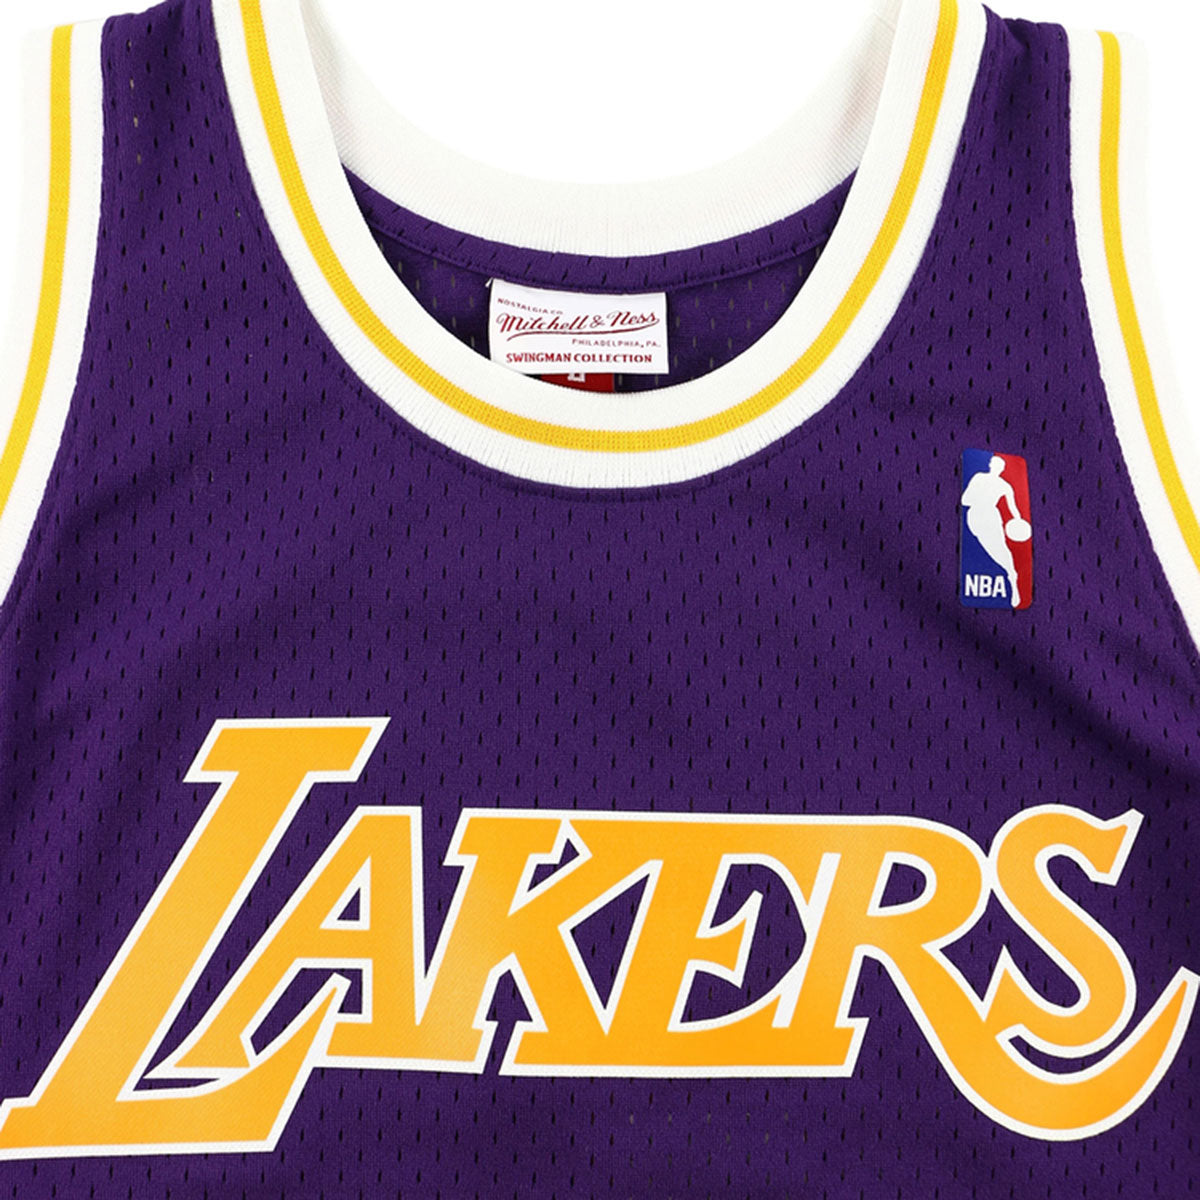 Mitchell & Ness Los Angeles Lakers Dennis Rodman #73 '98 -'99 Home Jersey  Gold